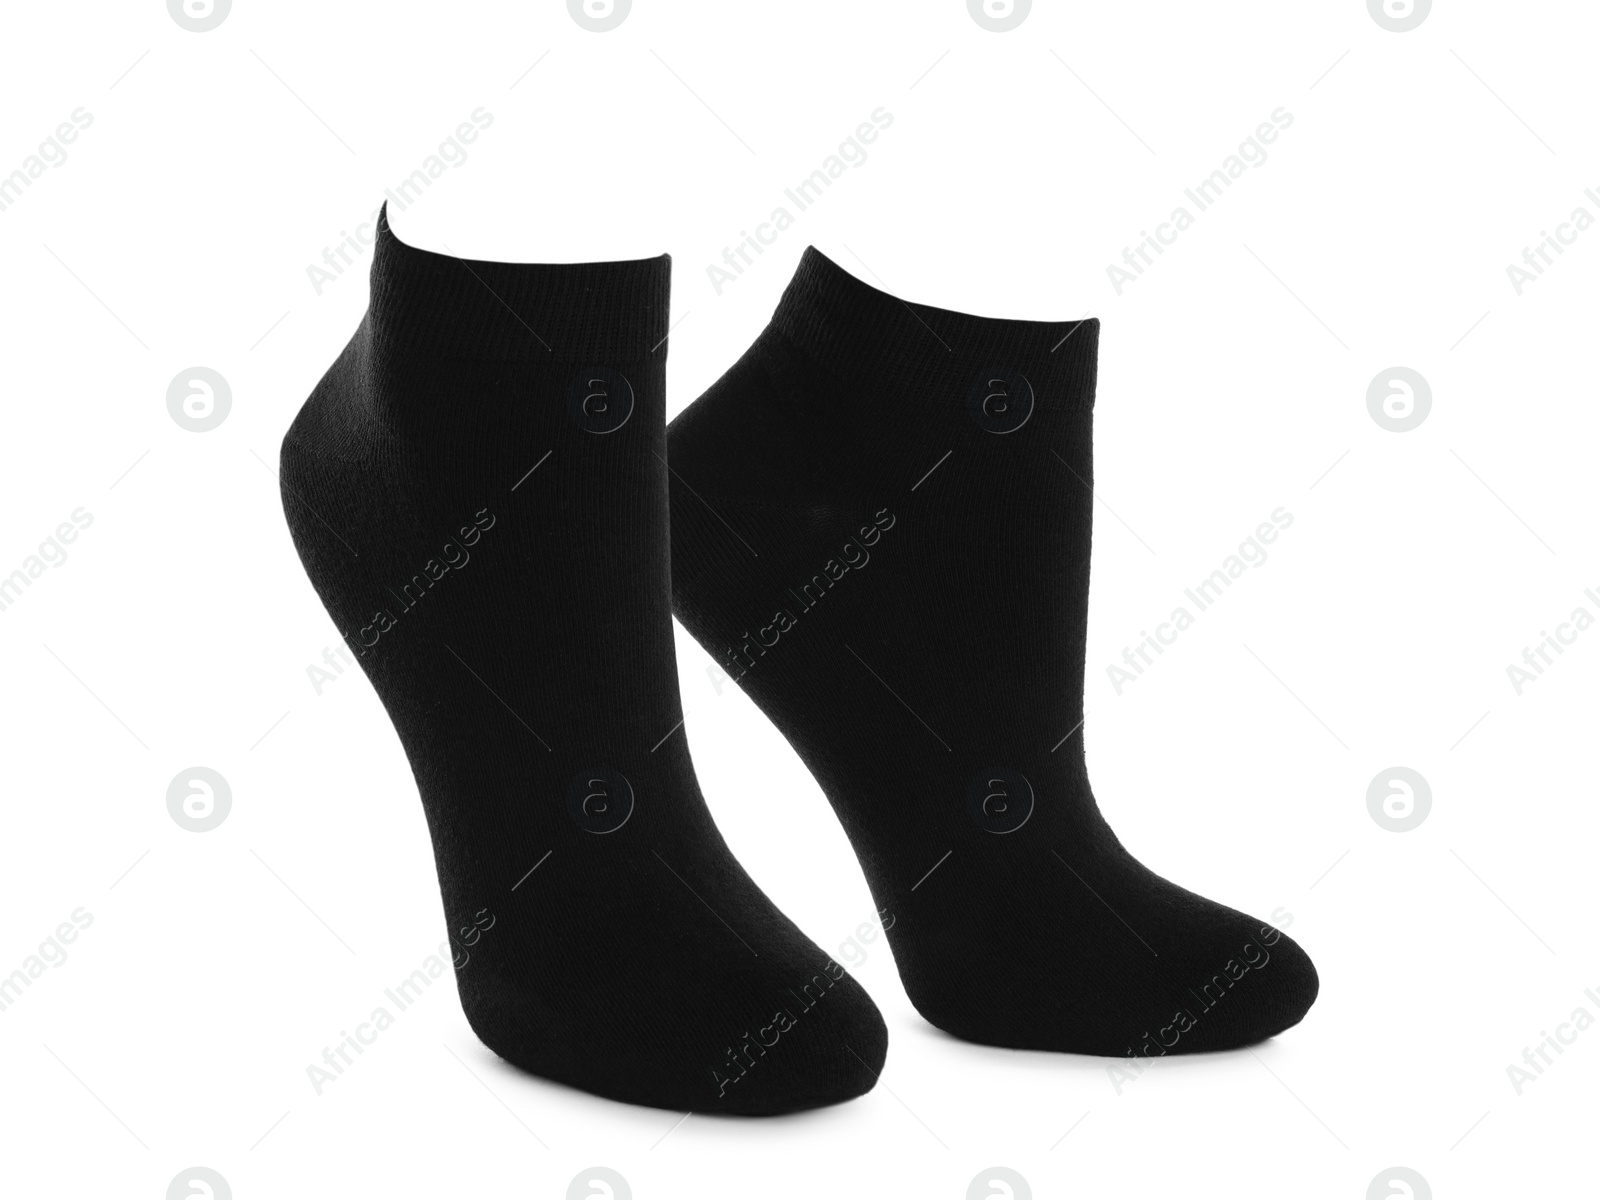 Image of Pair of black socks isolated on white